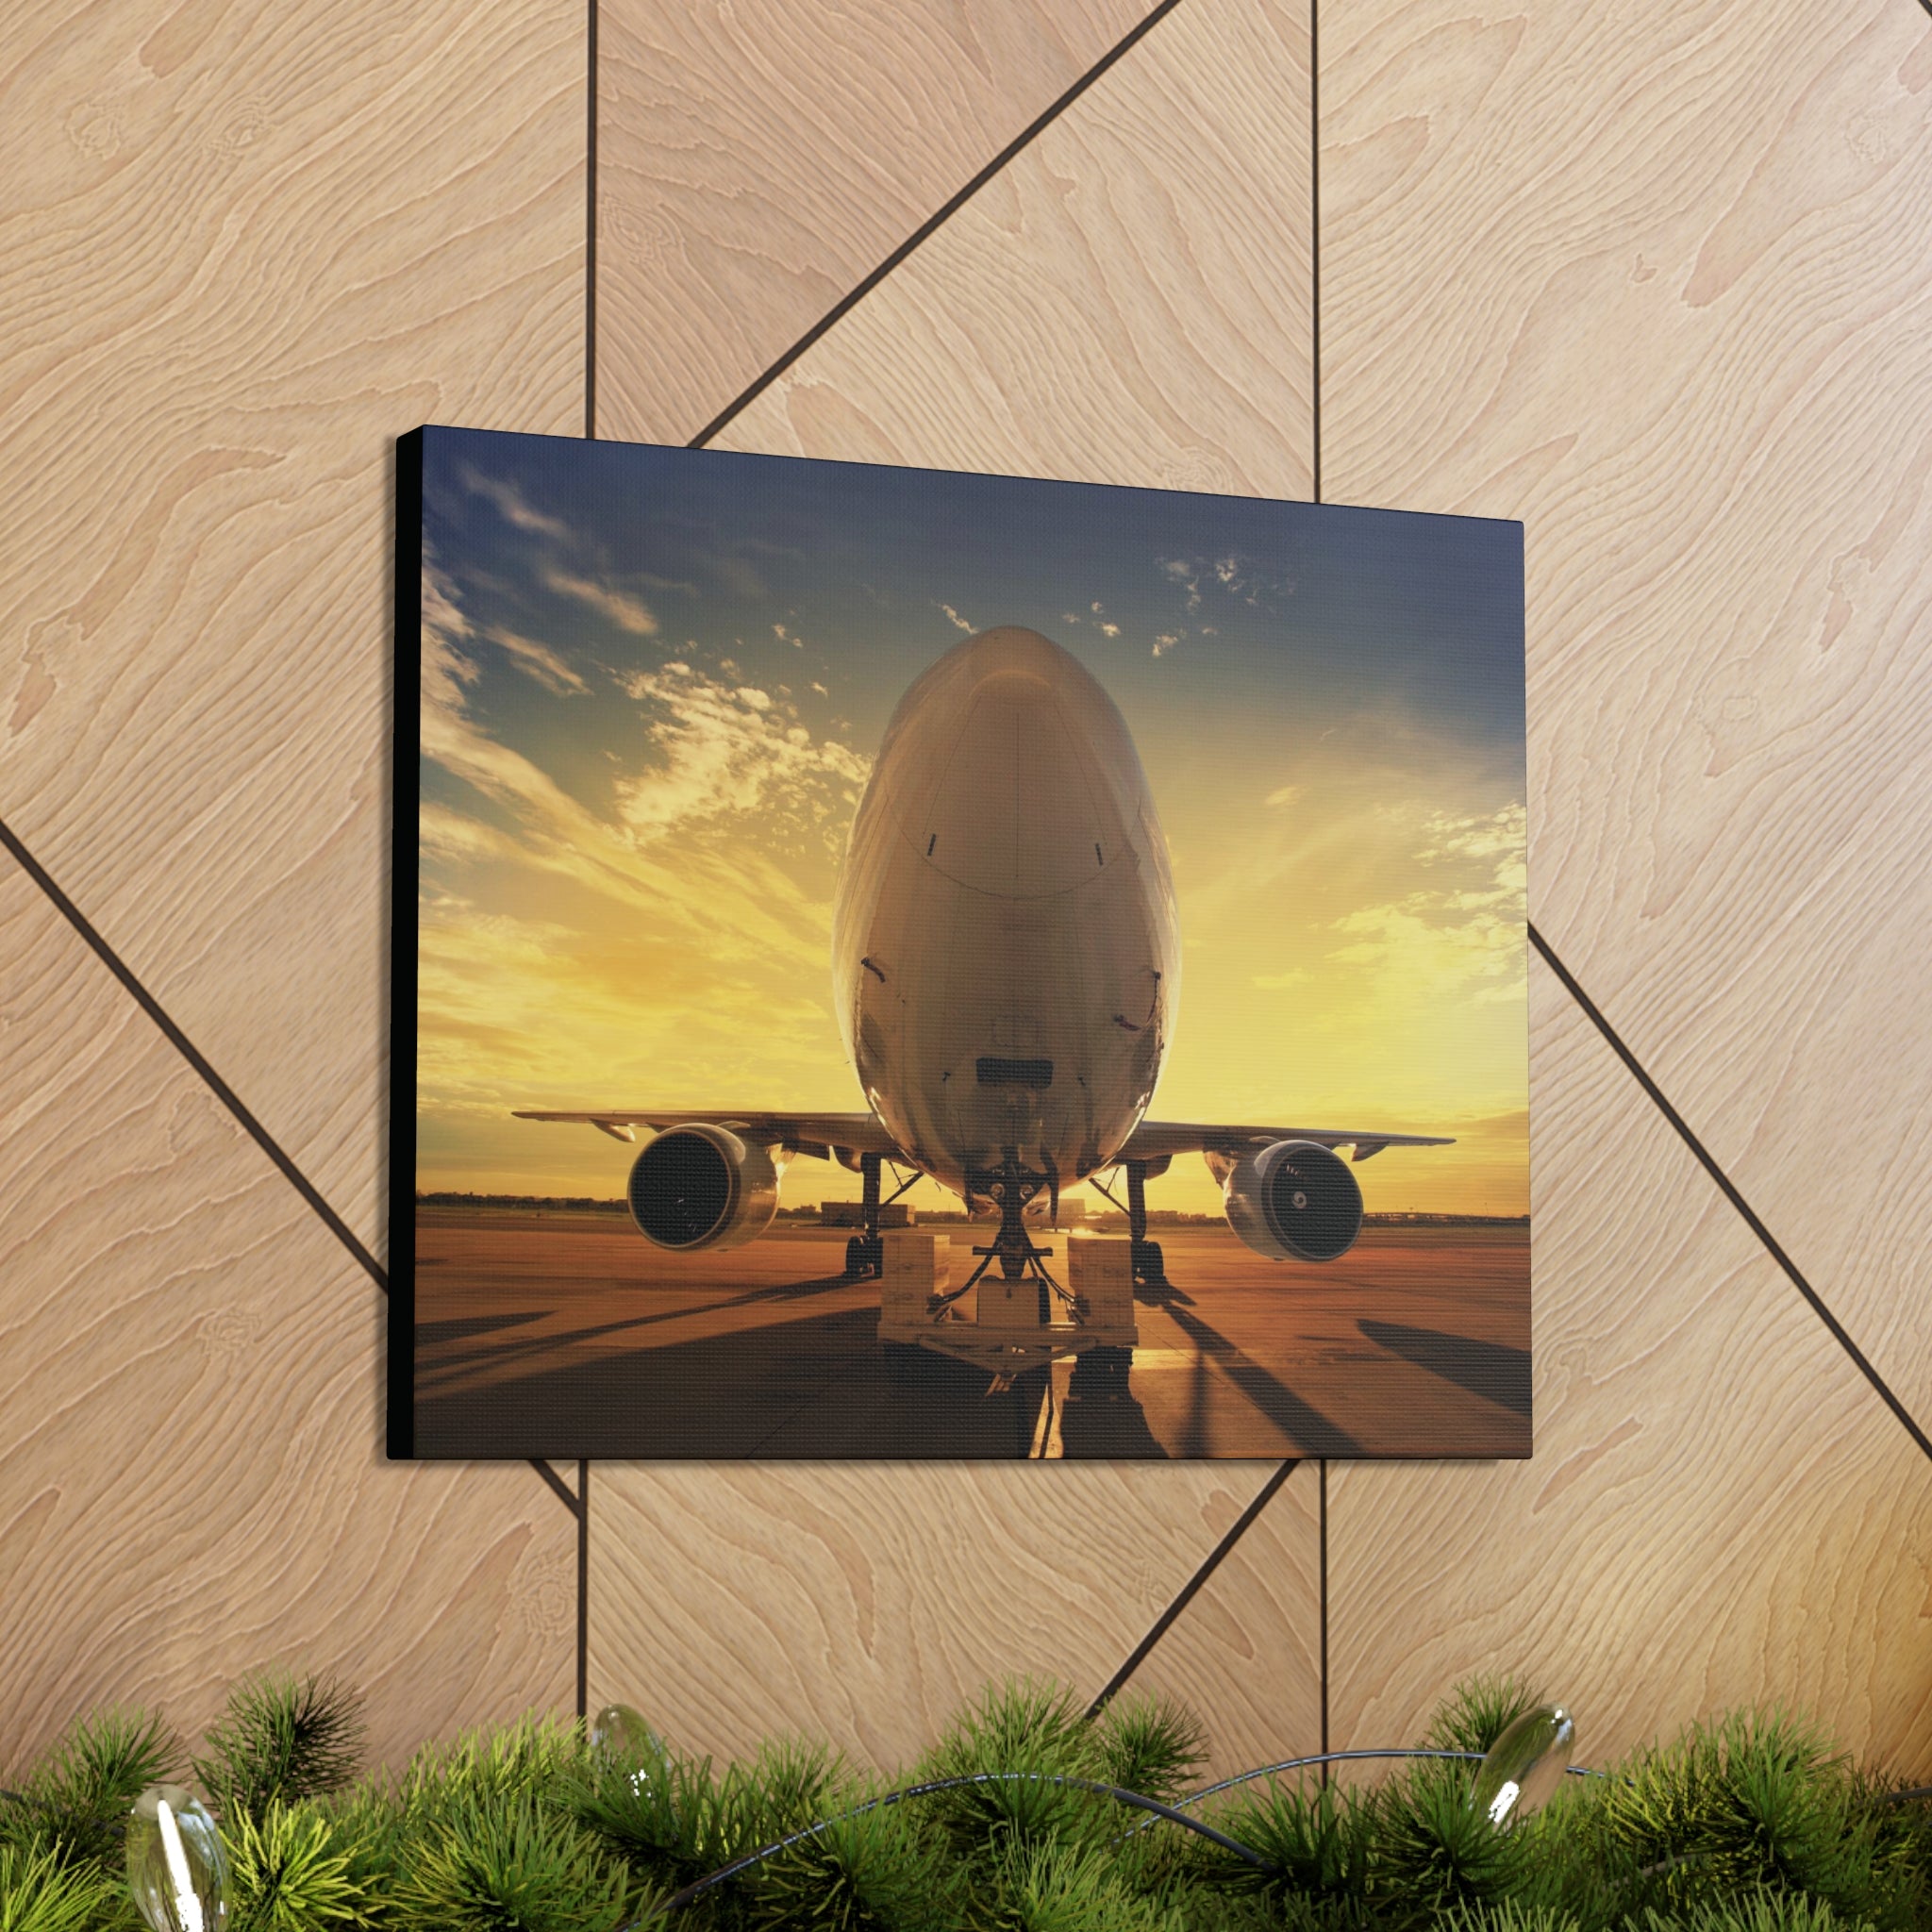 Commercial Jet Sunset Canvas Gallery Wrap